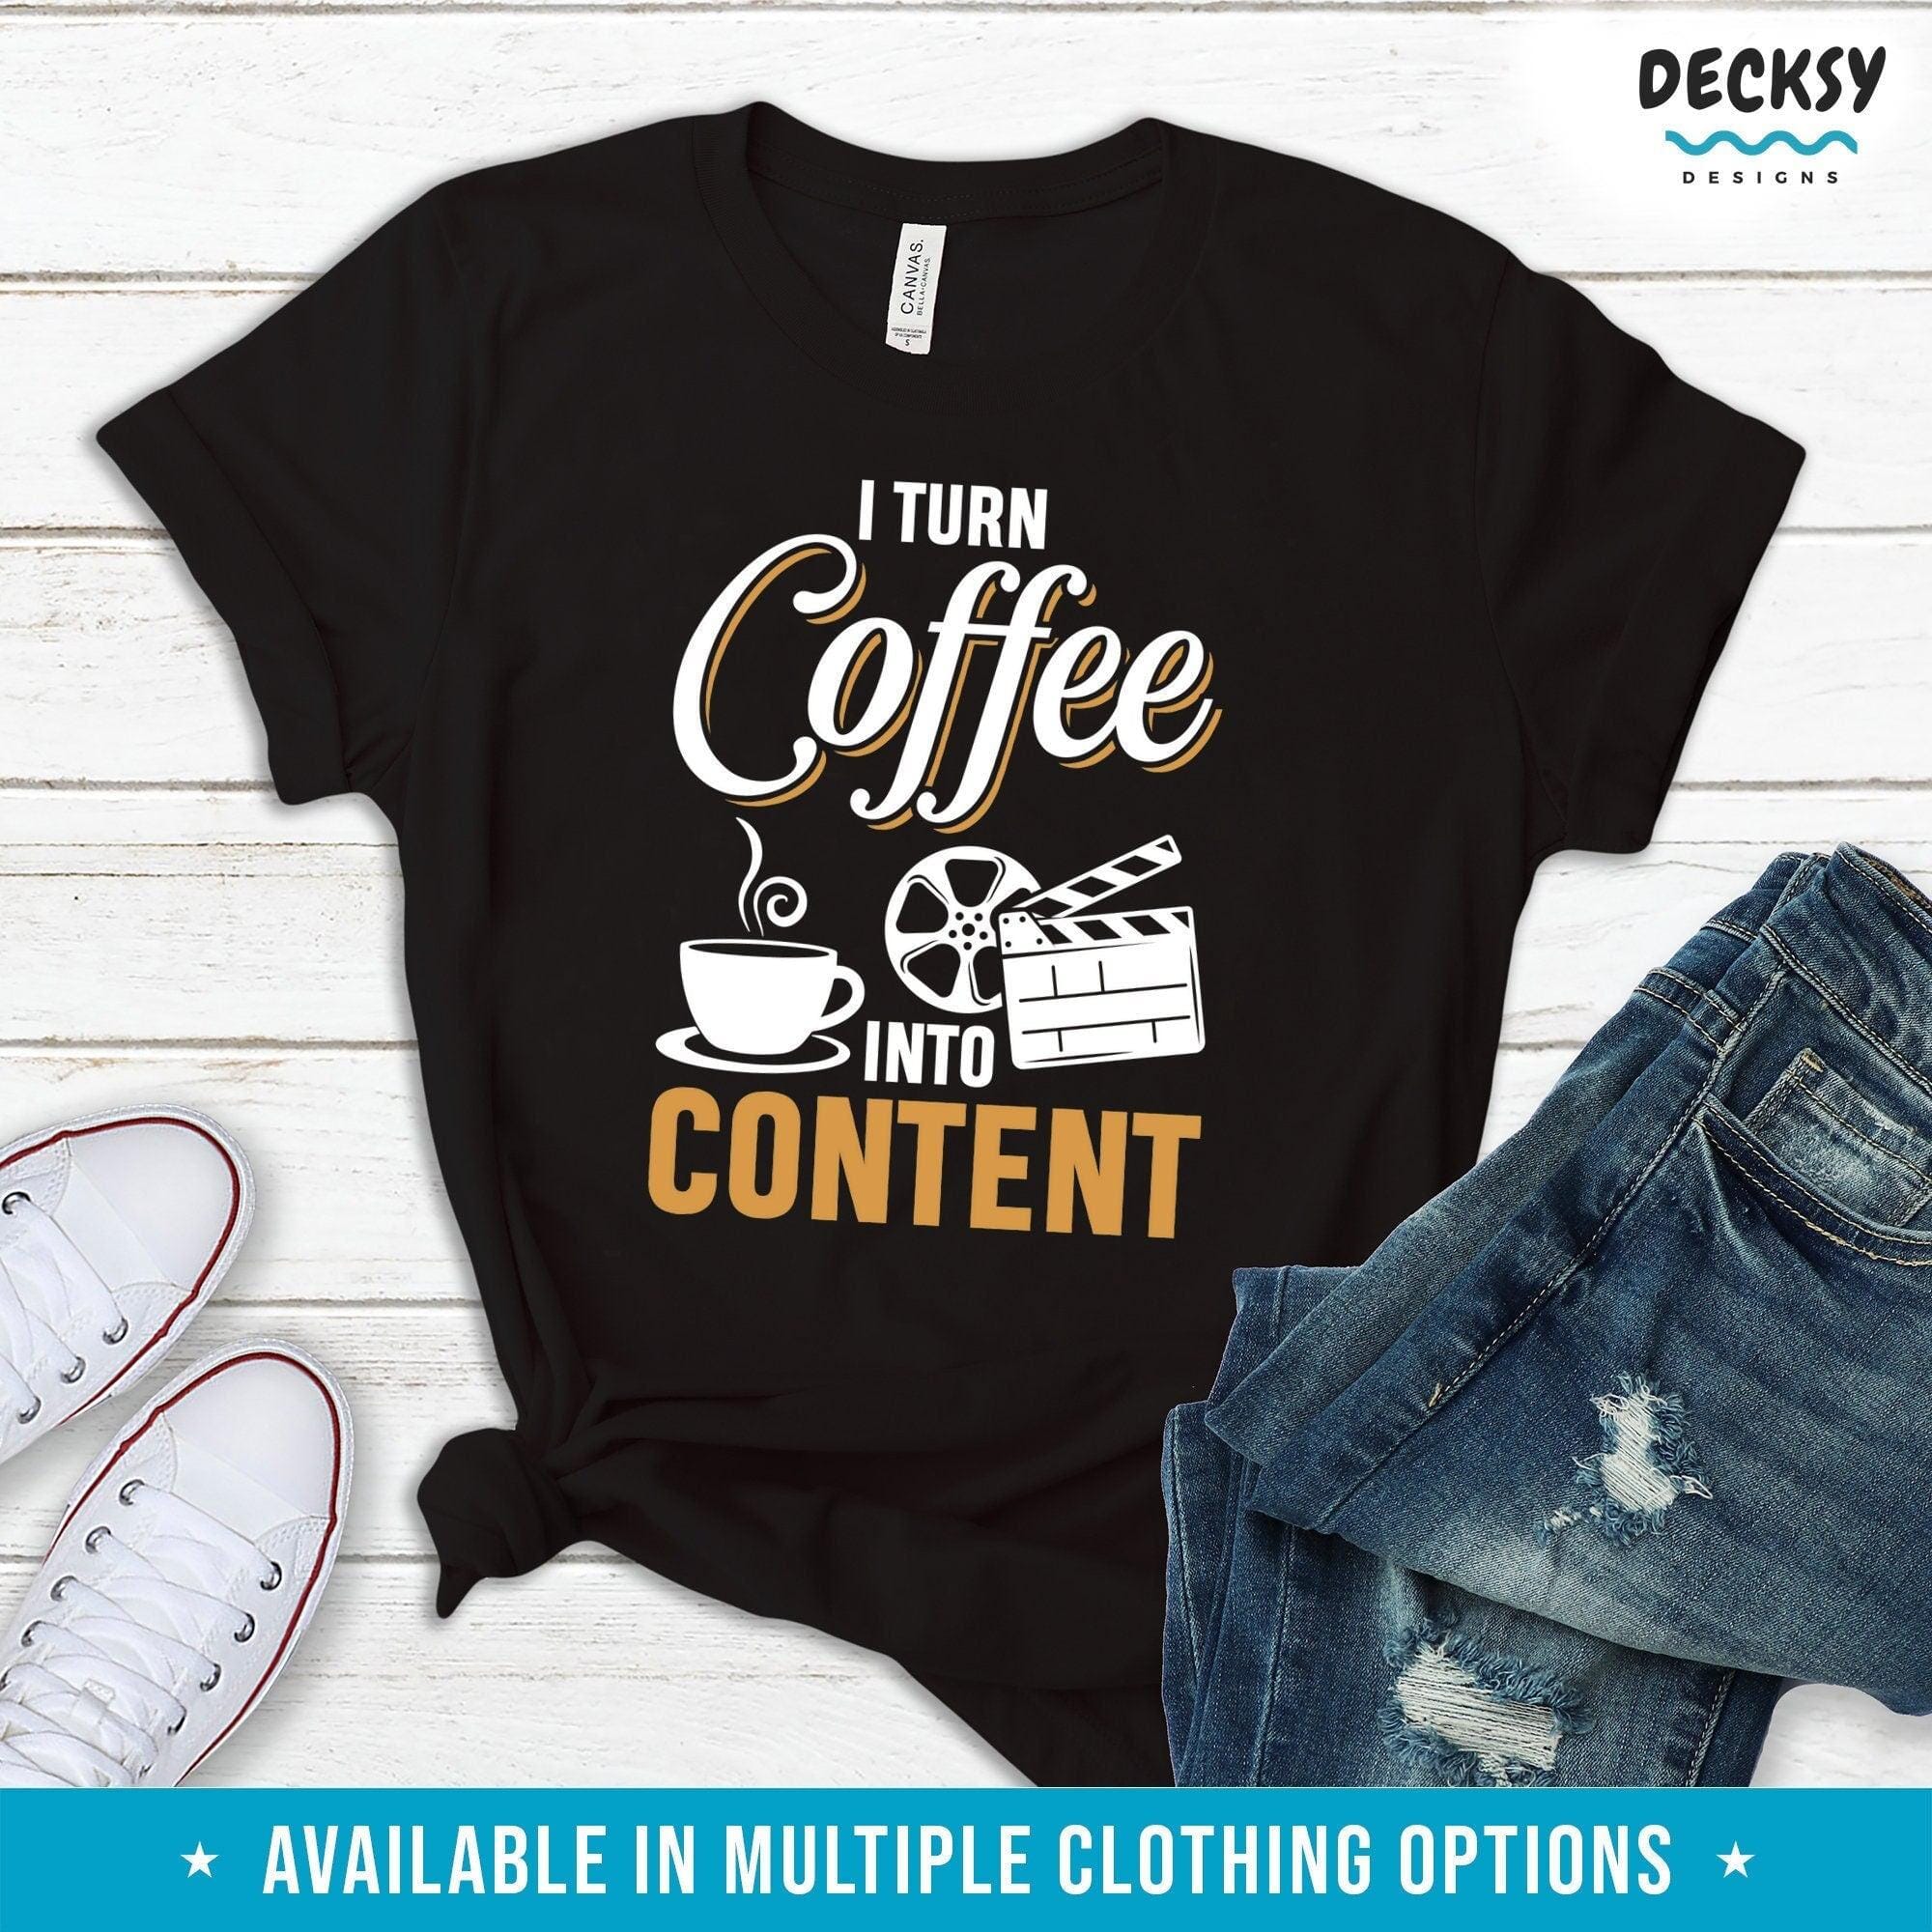 Video Content Creator Shirt, Gift for Influencer-Clothing:Gender-Neutral Adult Clothing:Tops & Tees:T-shirts:Graphic Tees-DecksyDesigns